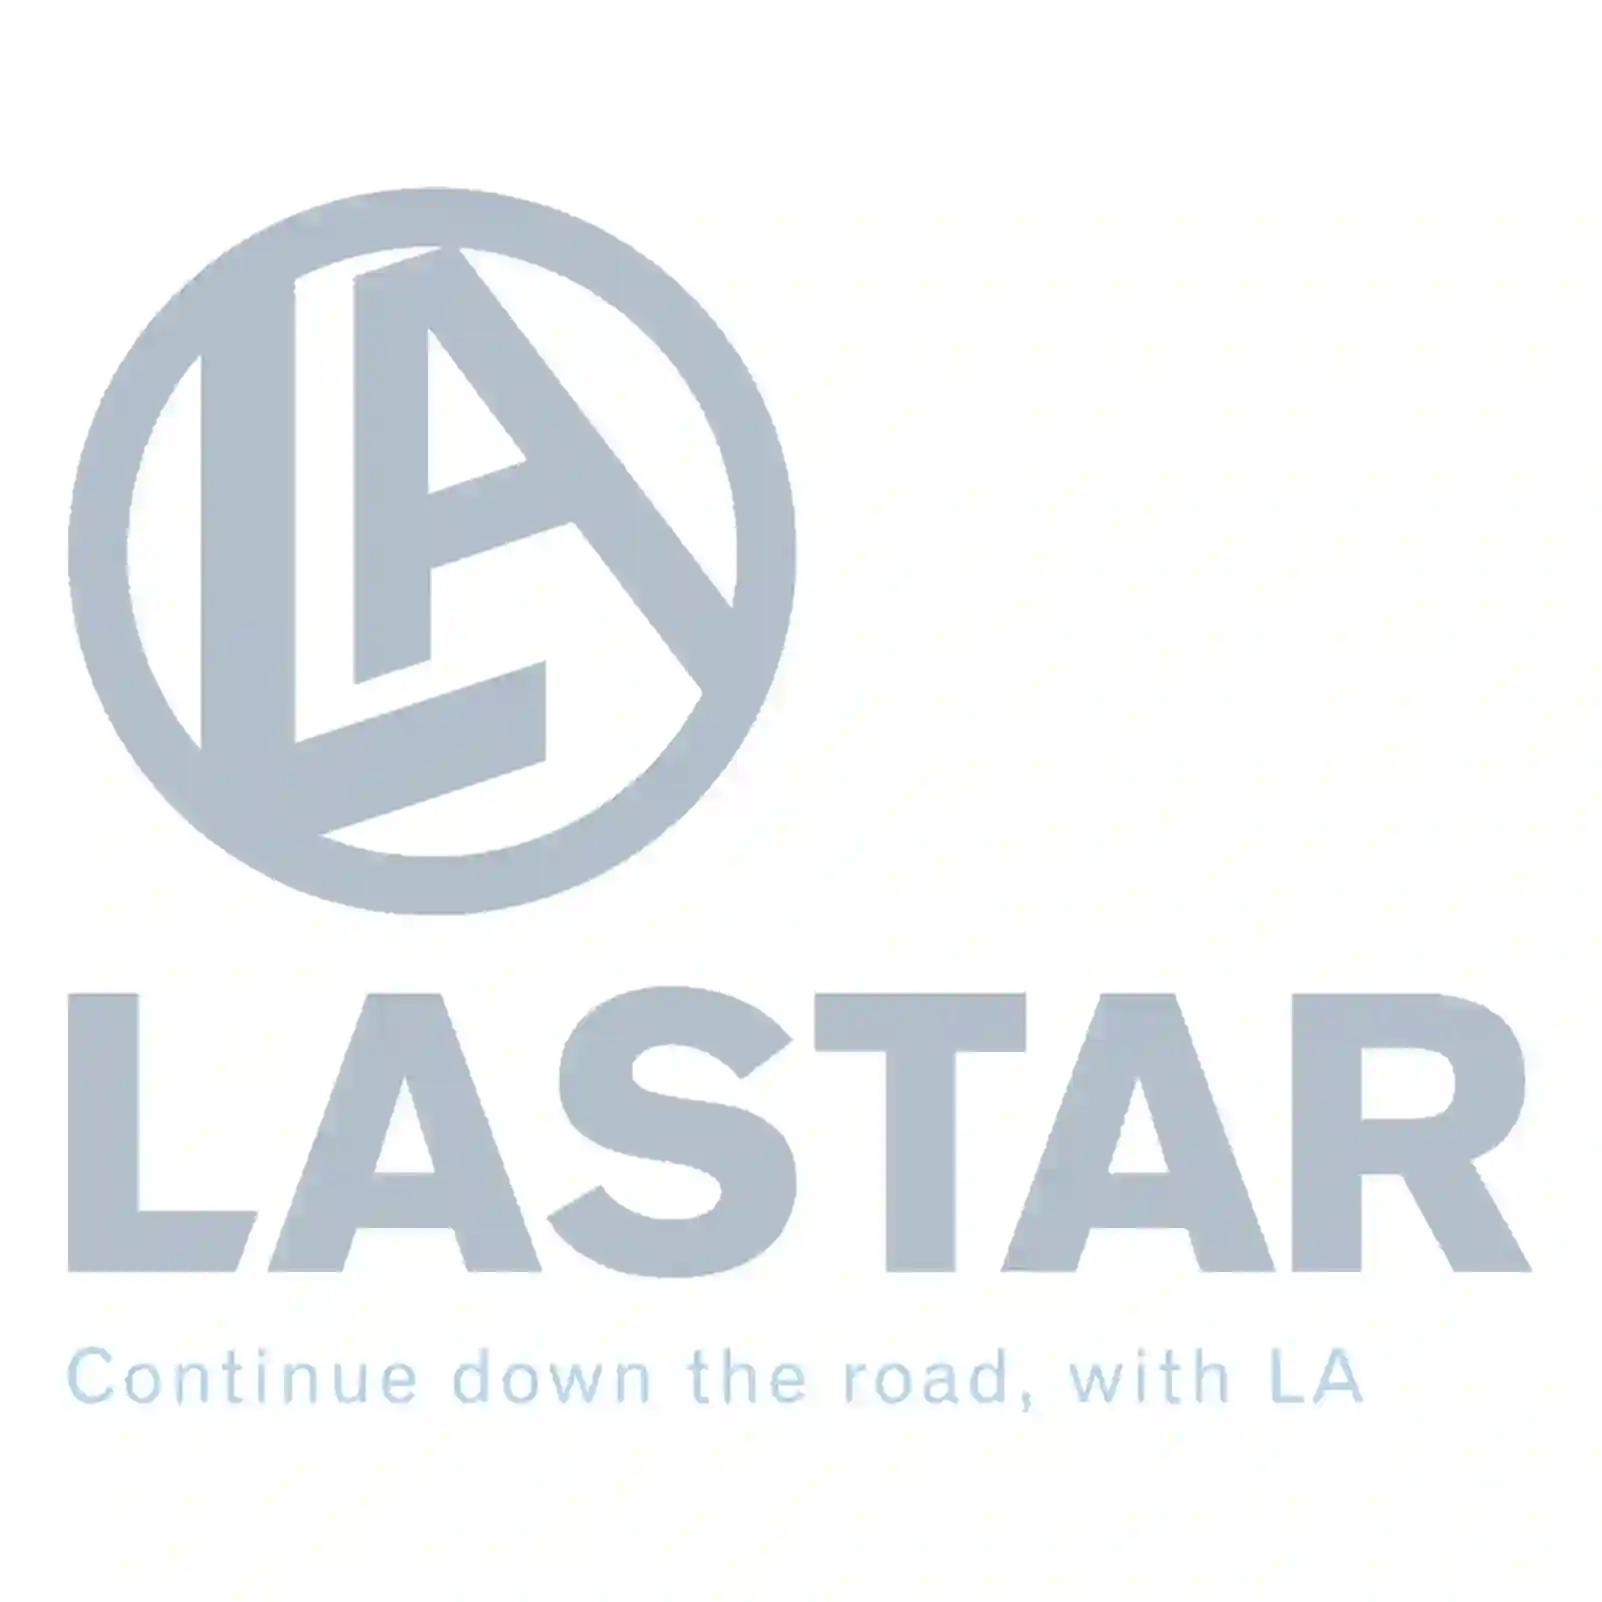  Charger, starter battery, WEEE-Reg-No. DE 57605858 || Lastar Spare Part | Truck Spare Parts, Auotomotive Spare Parts